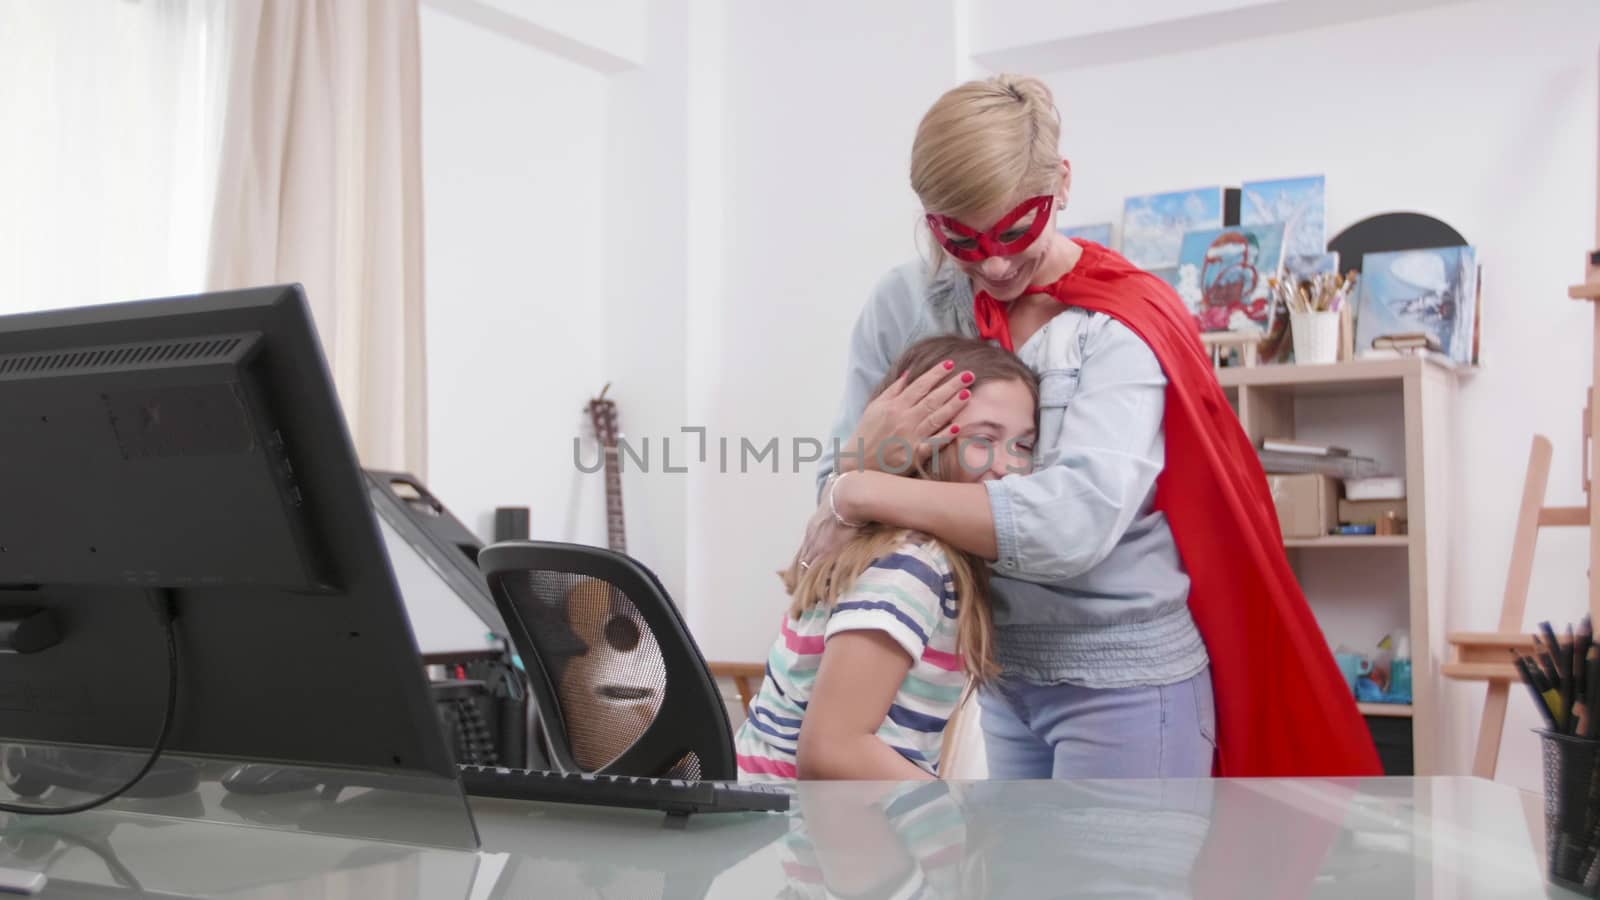 Supermom comes to help her daughter while she is having a problem. Girl gets help from a woman dressed in superhero costume.